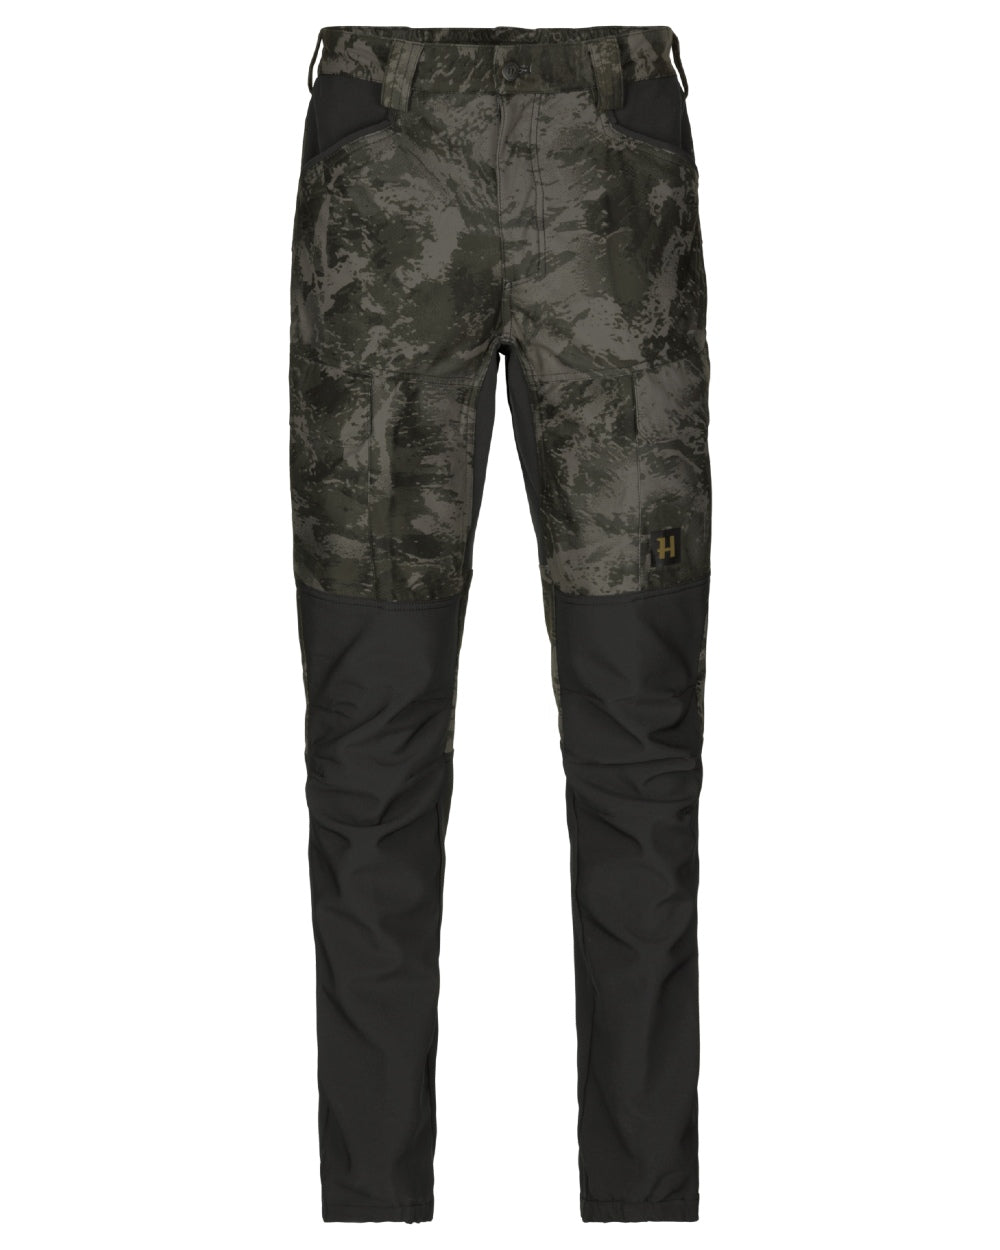 AXIS Black/Black coloured Harkila NOCTYX Camo Silent Trousers on white background